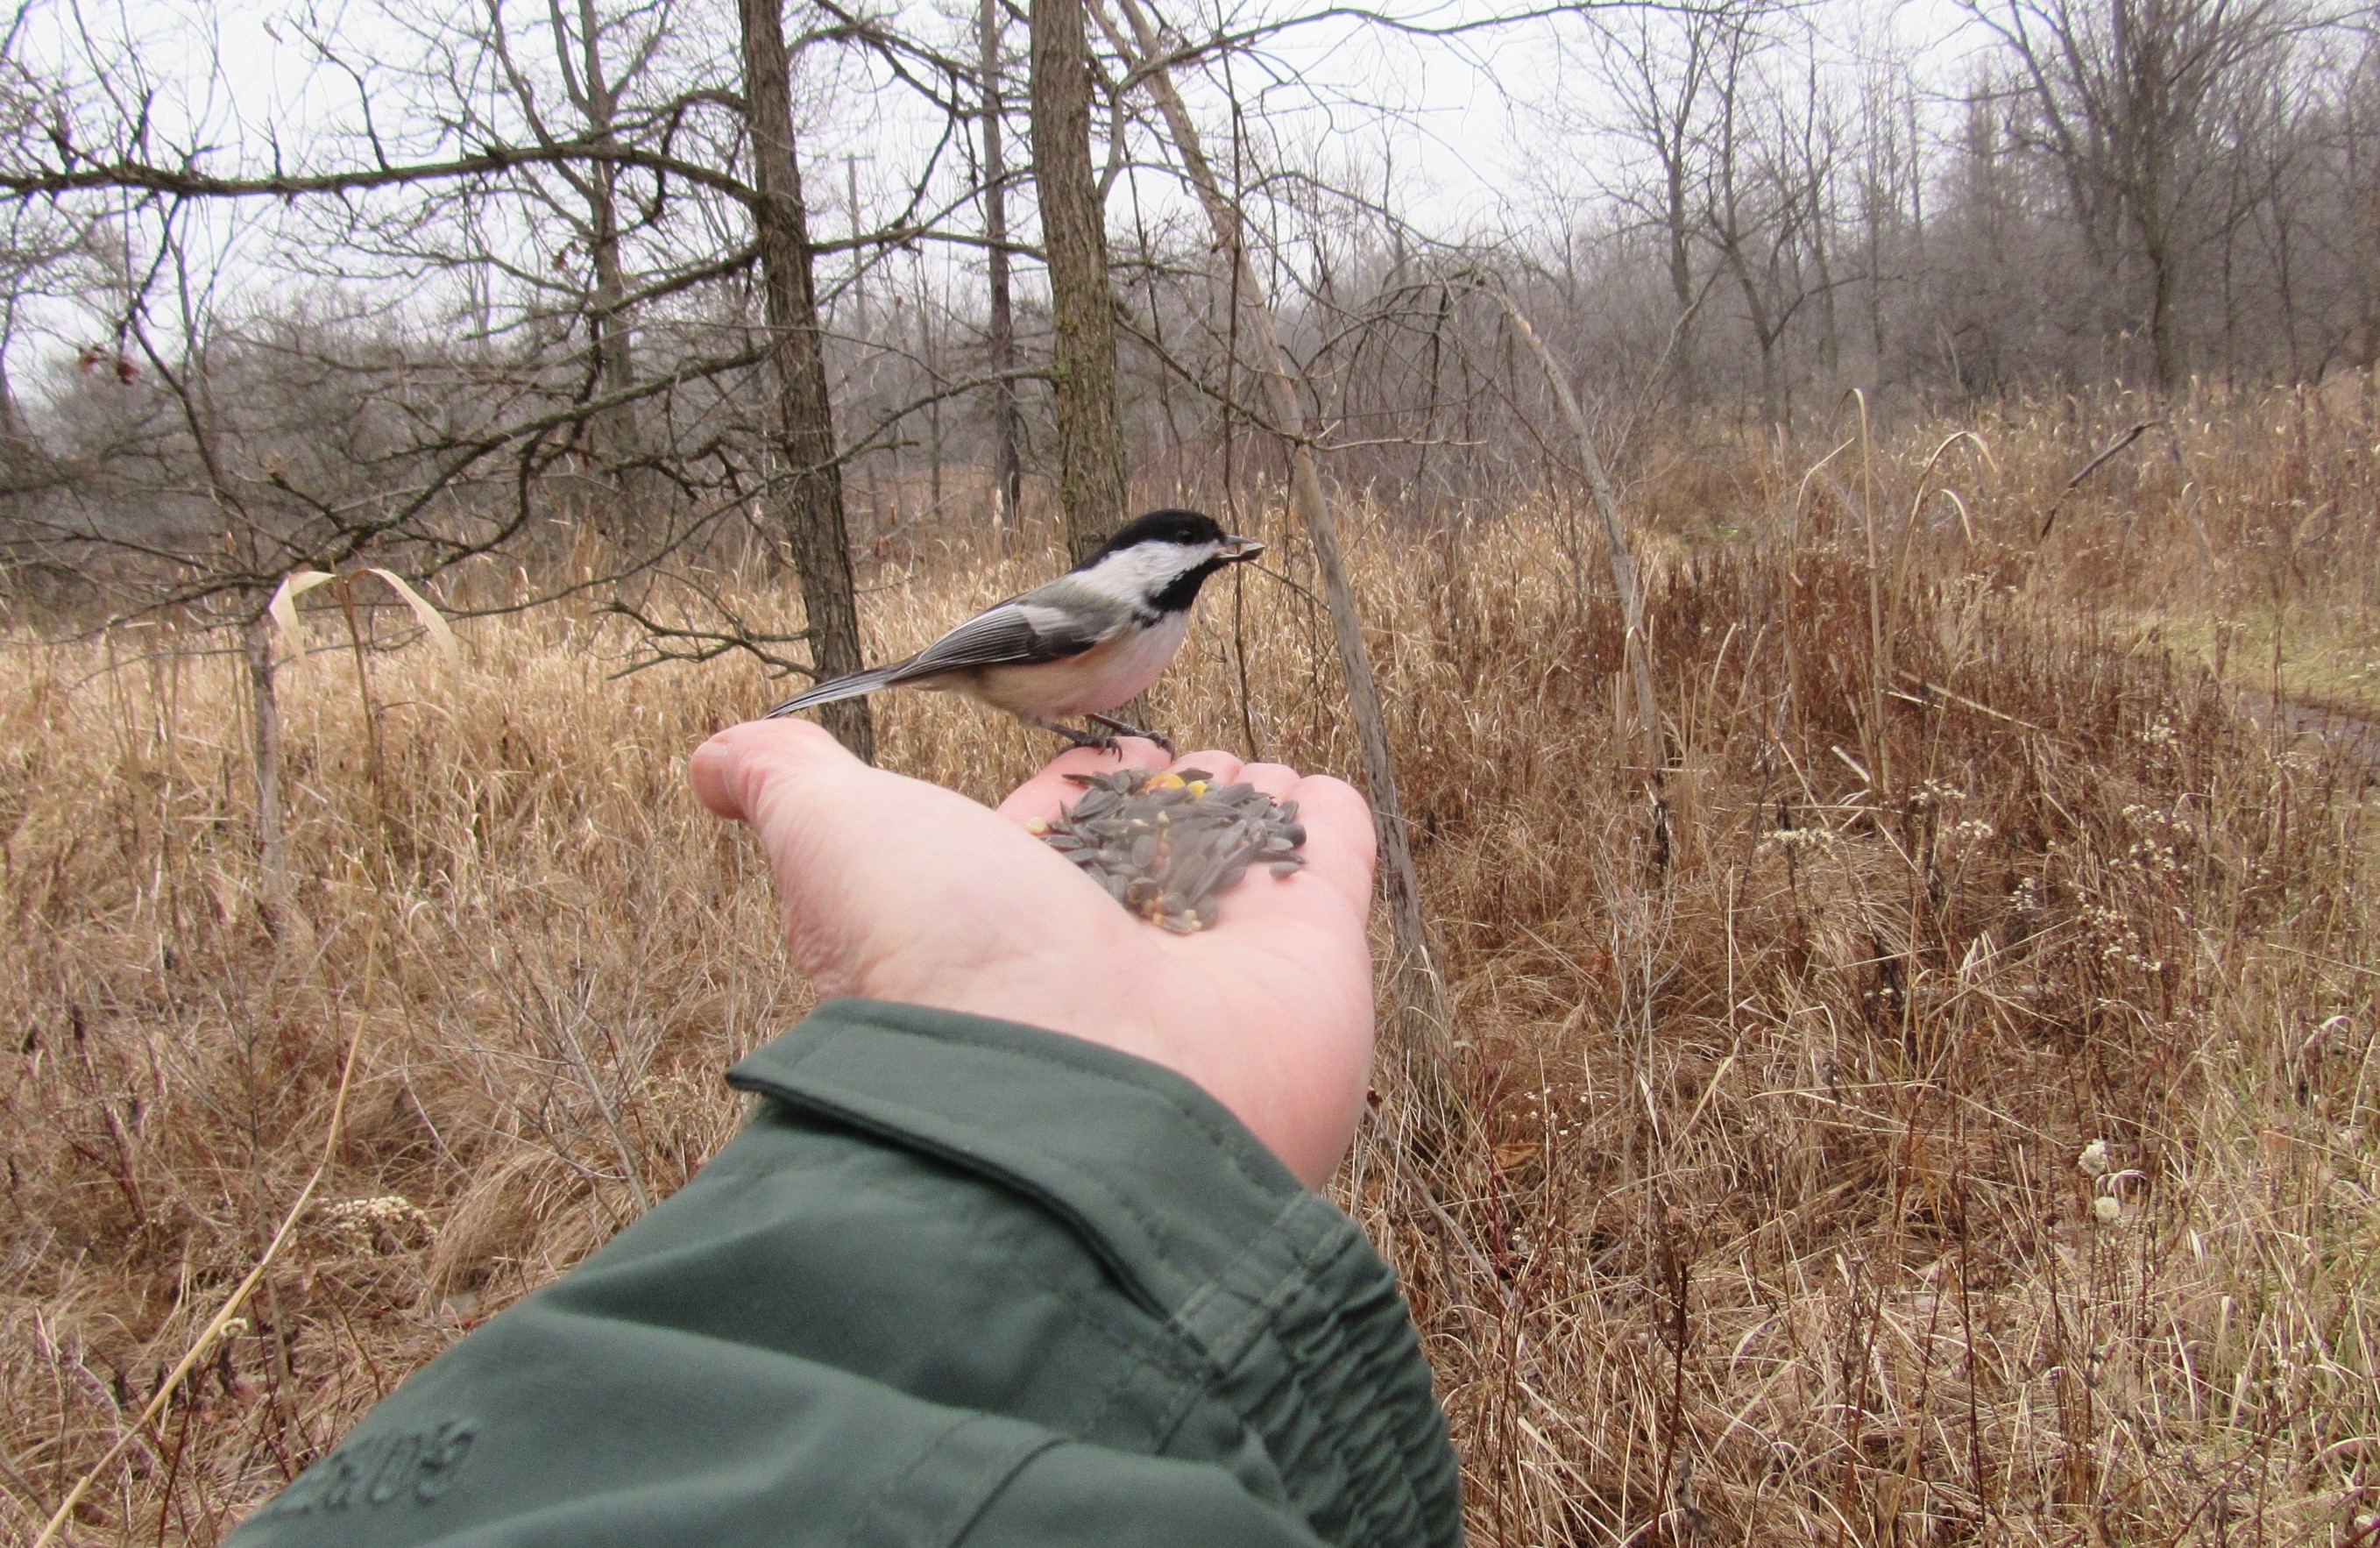 A Black-capped Chickadee perches on the author's hand.